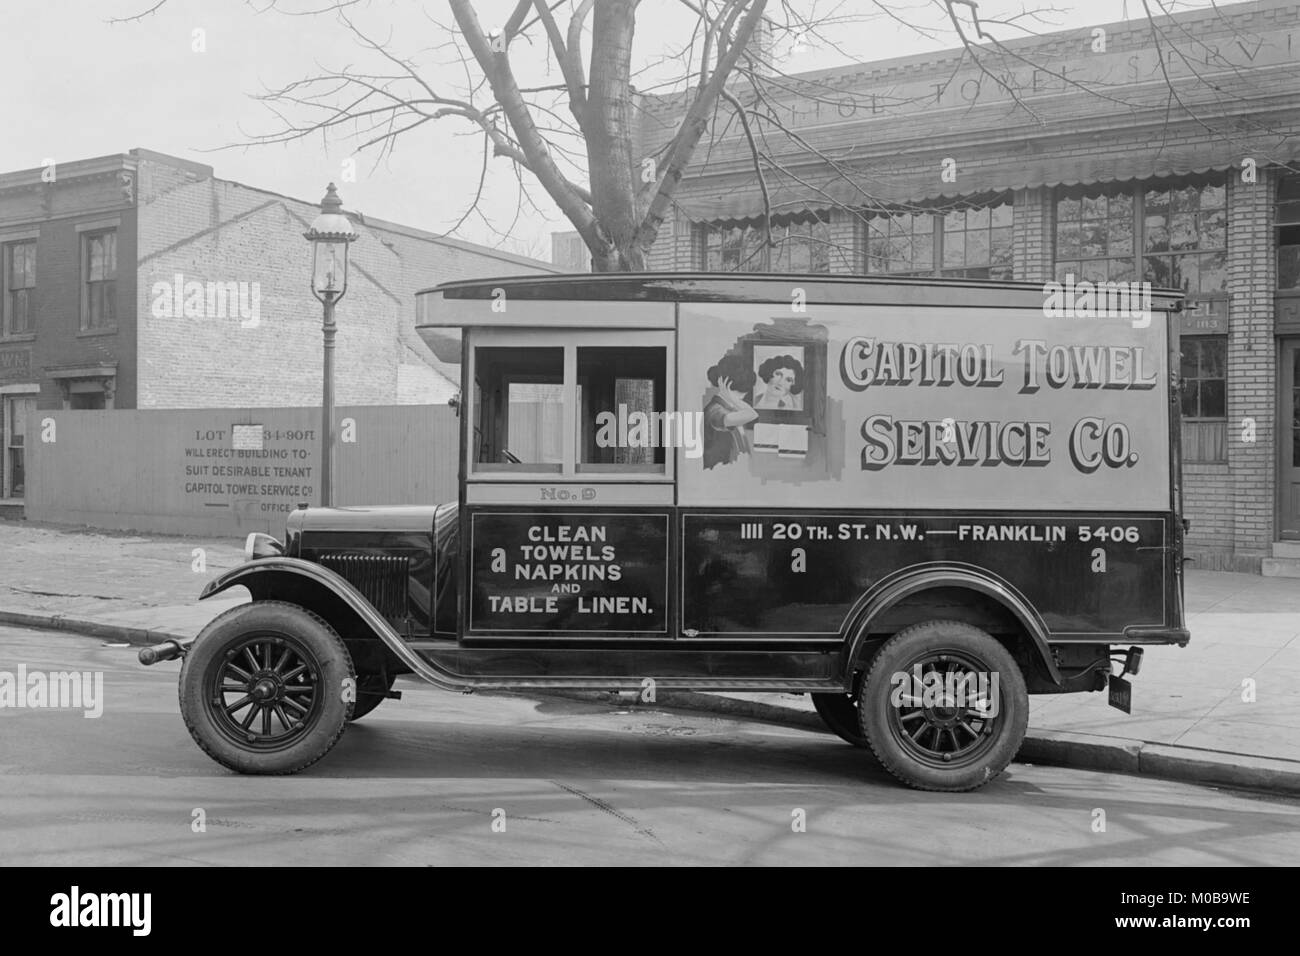 Capitol Towel Service Company Truck in DC Stock Photo